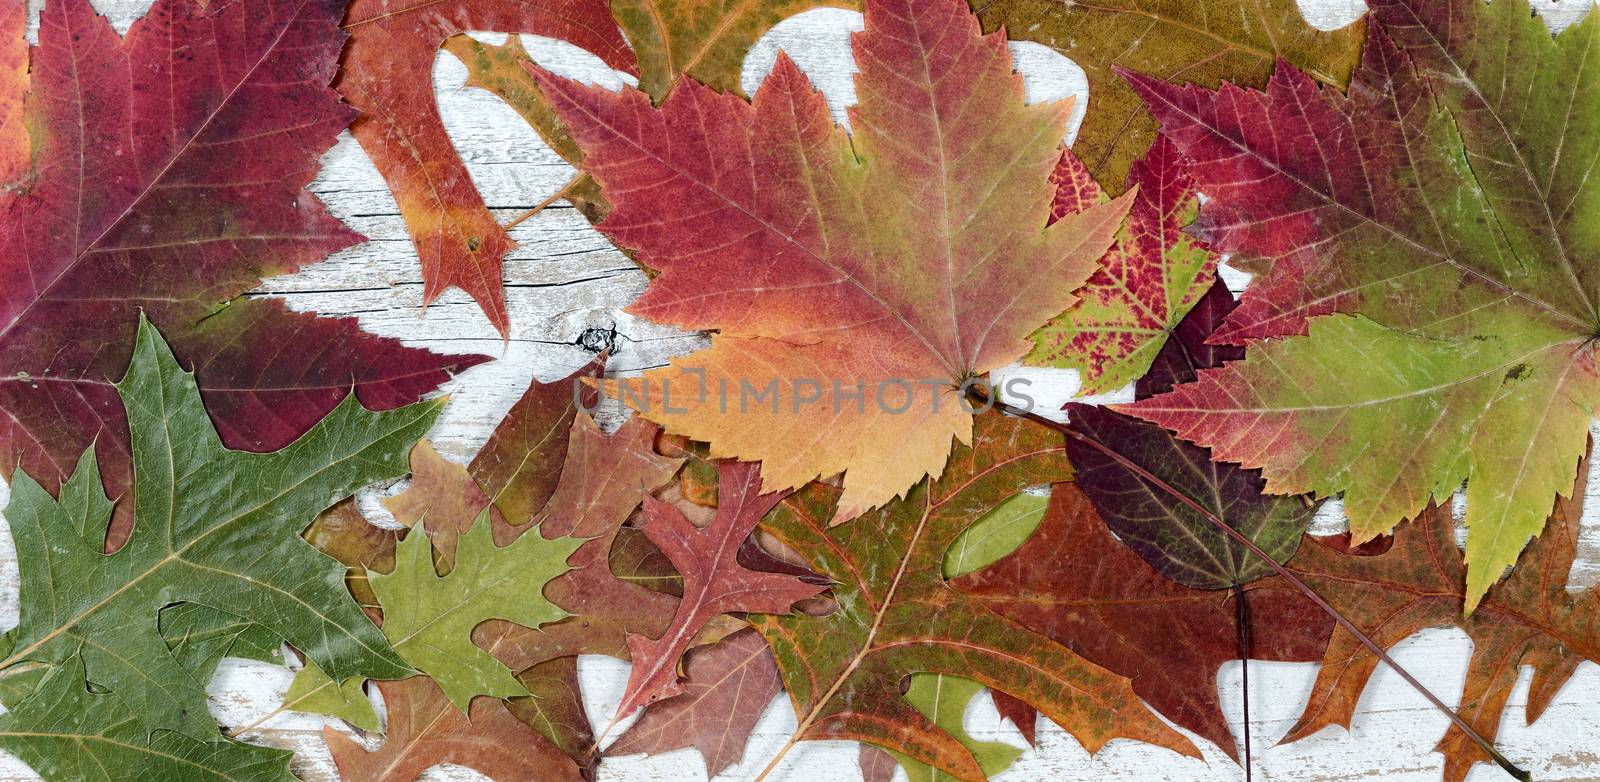 Autumn foliage on rustic white wood in filled frame layout  by tab1962